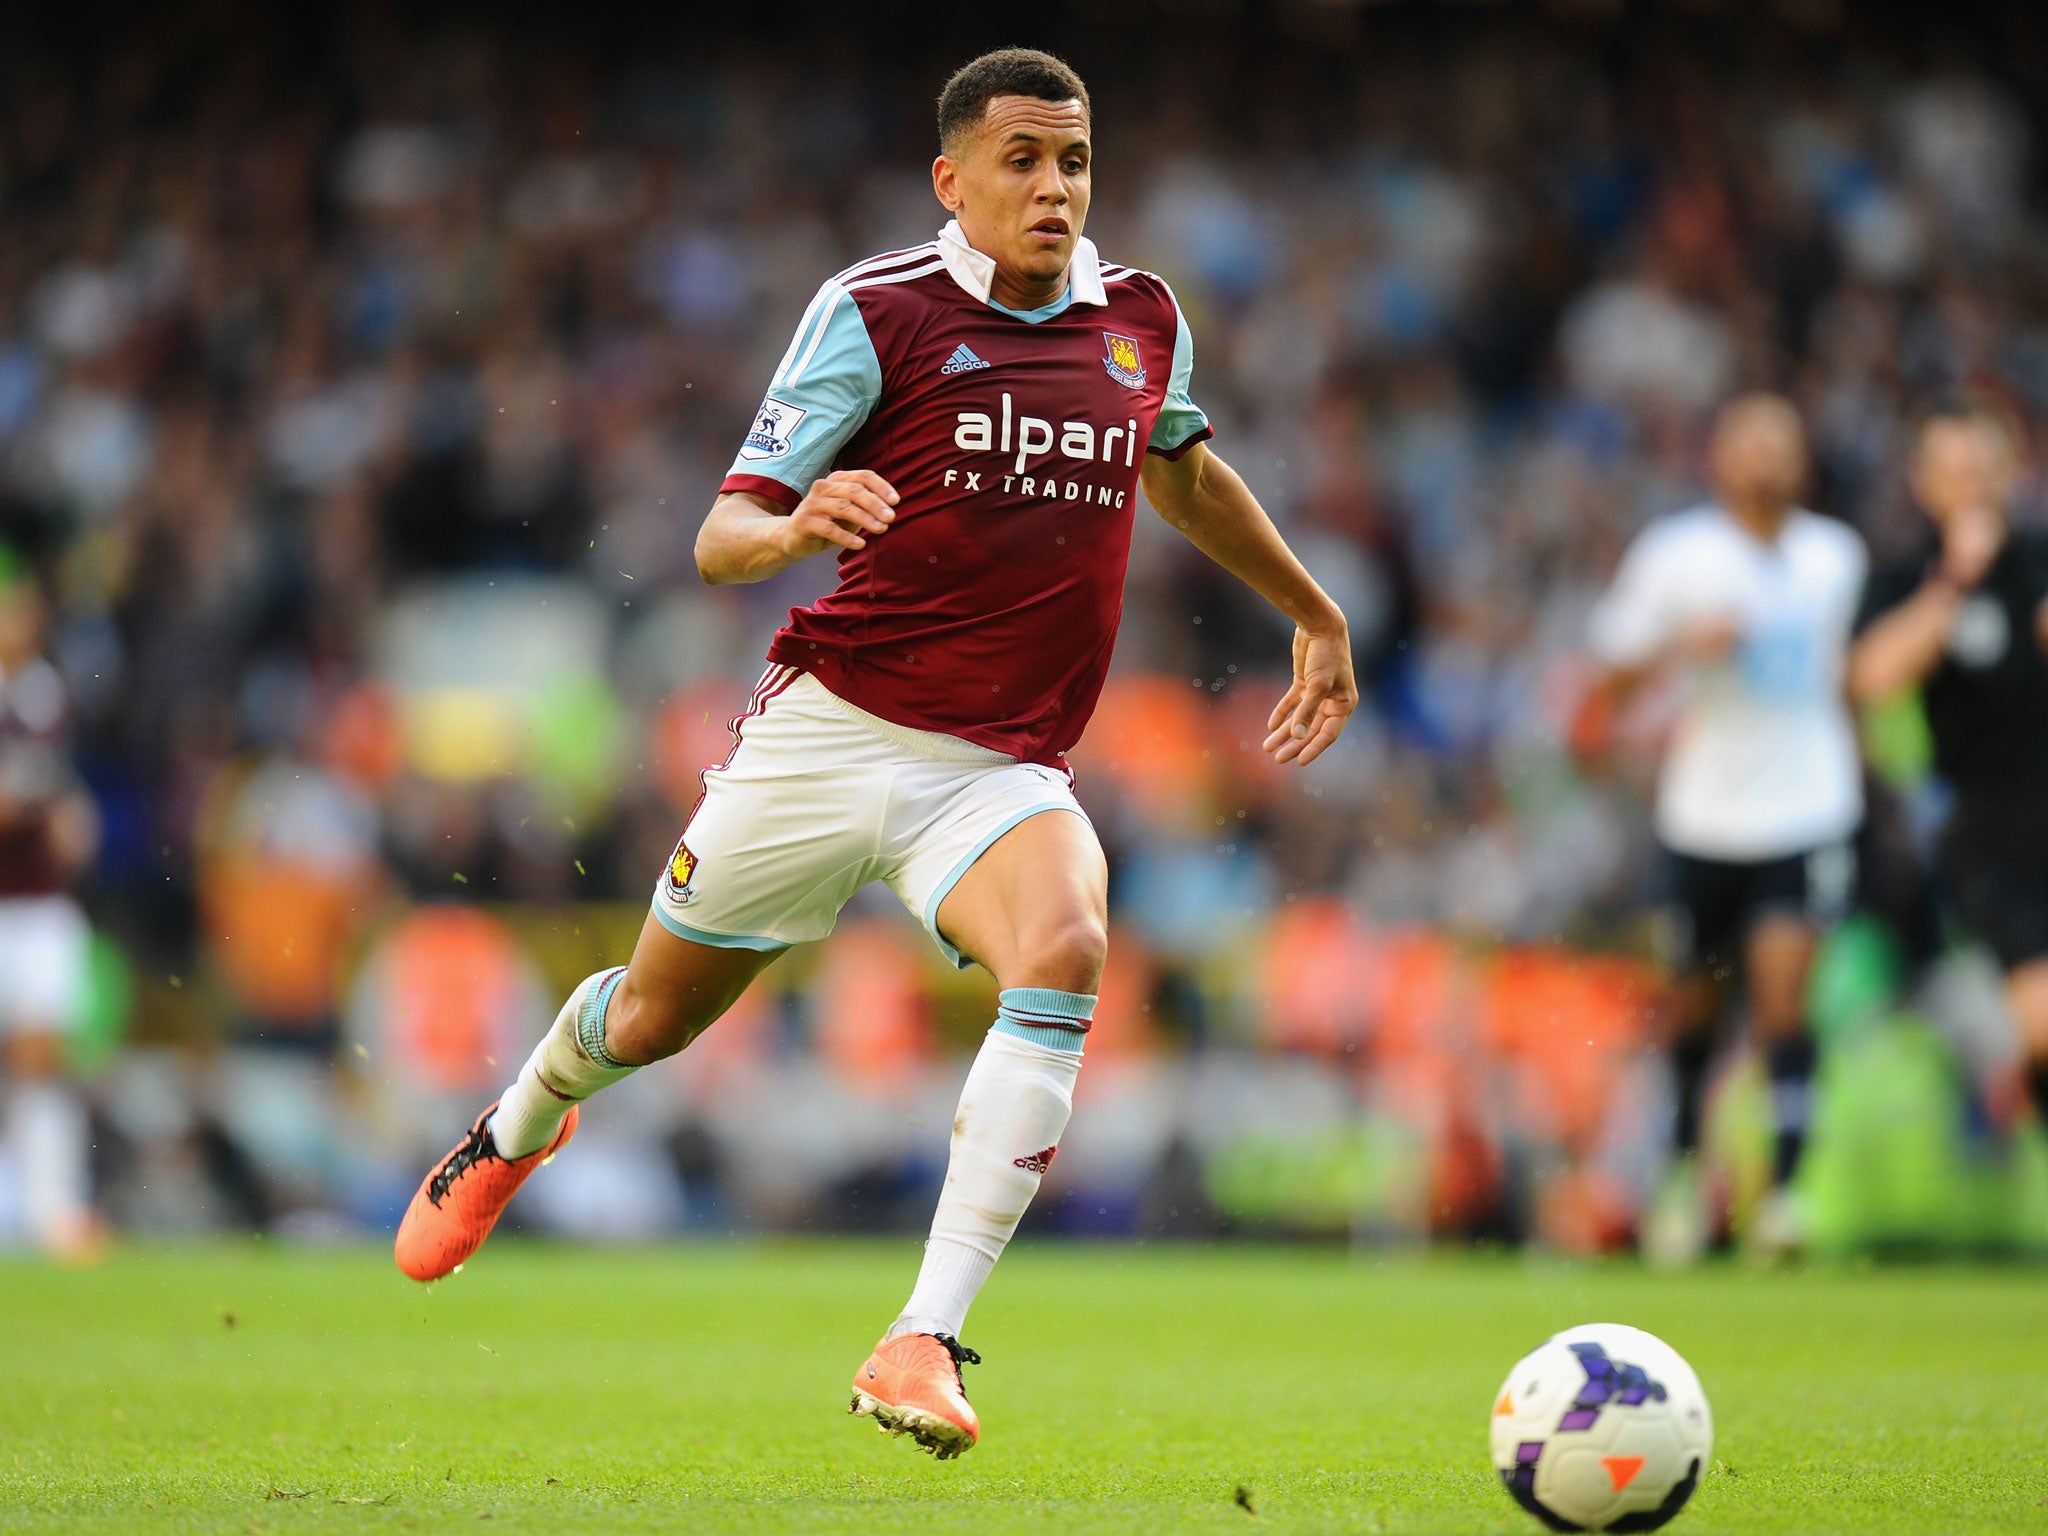 Ravel Morrison has been a key player for West Ham this season